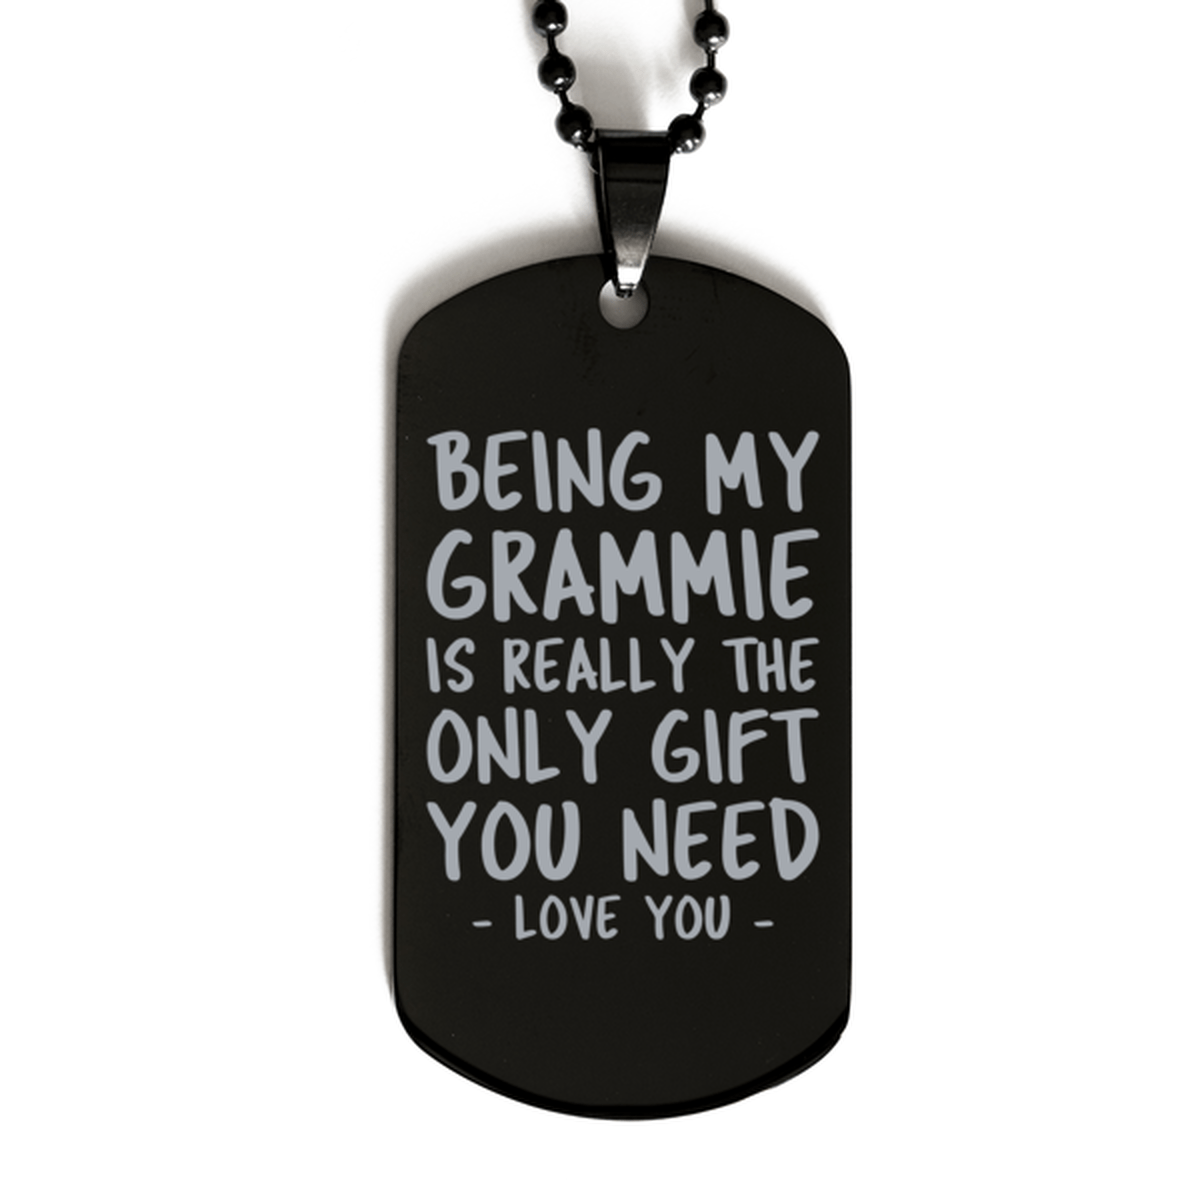 Funny Grammie Black Dog Tag Necklace, Being My Grammie Is Really the Only Gift You Need, Best Birthday Gifts for Grammie